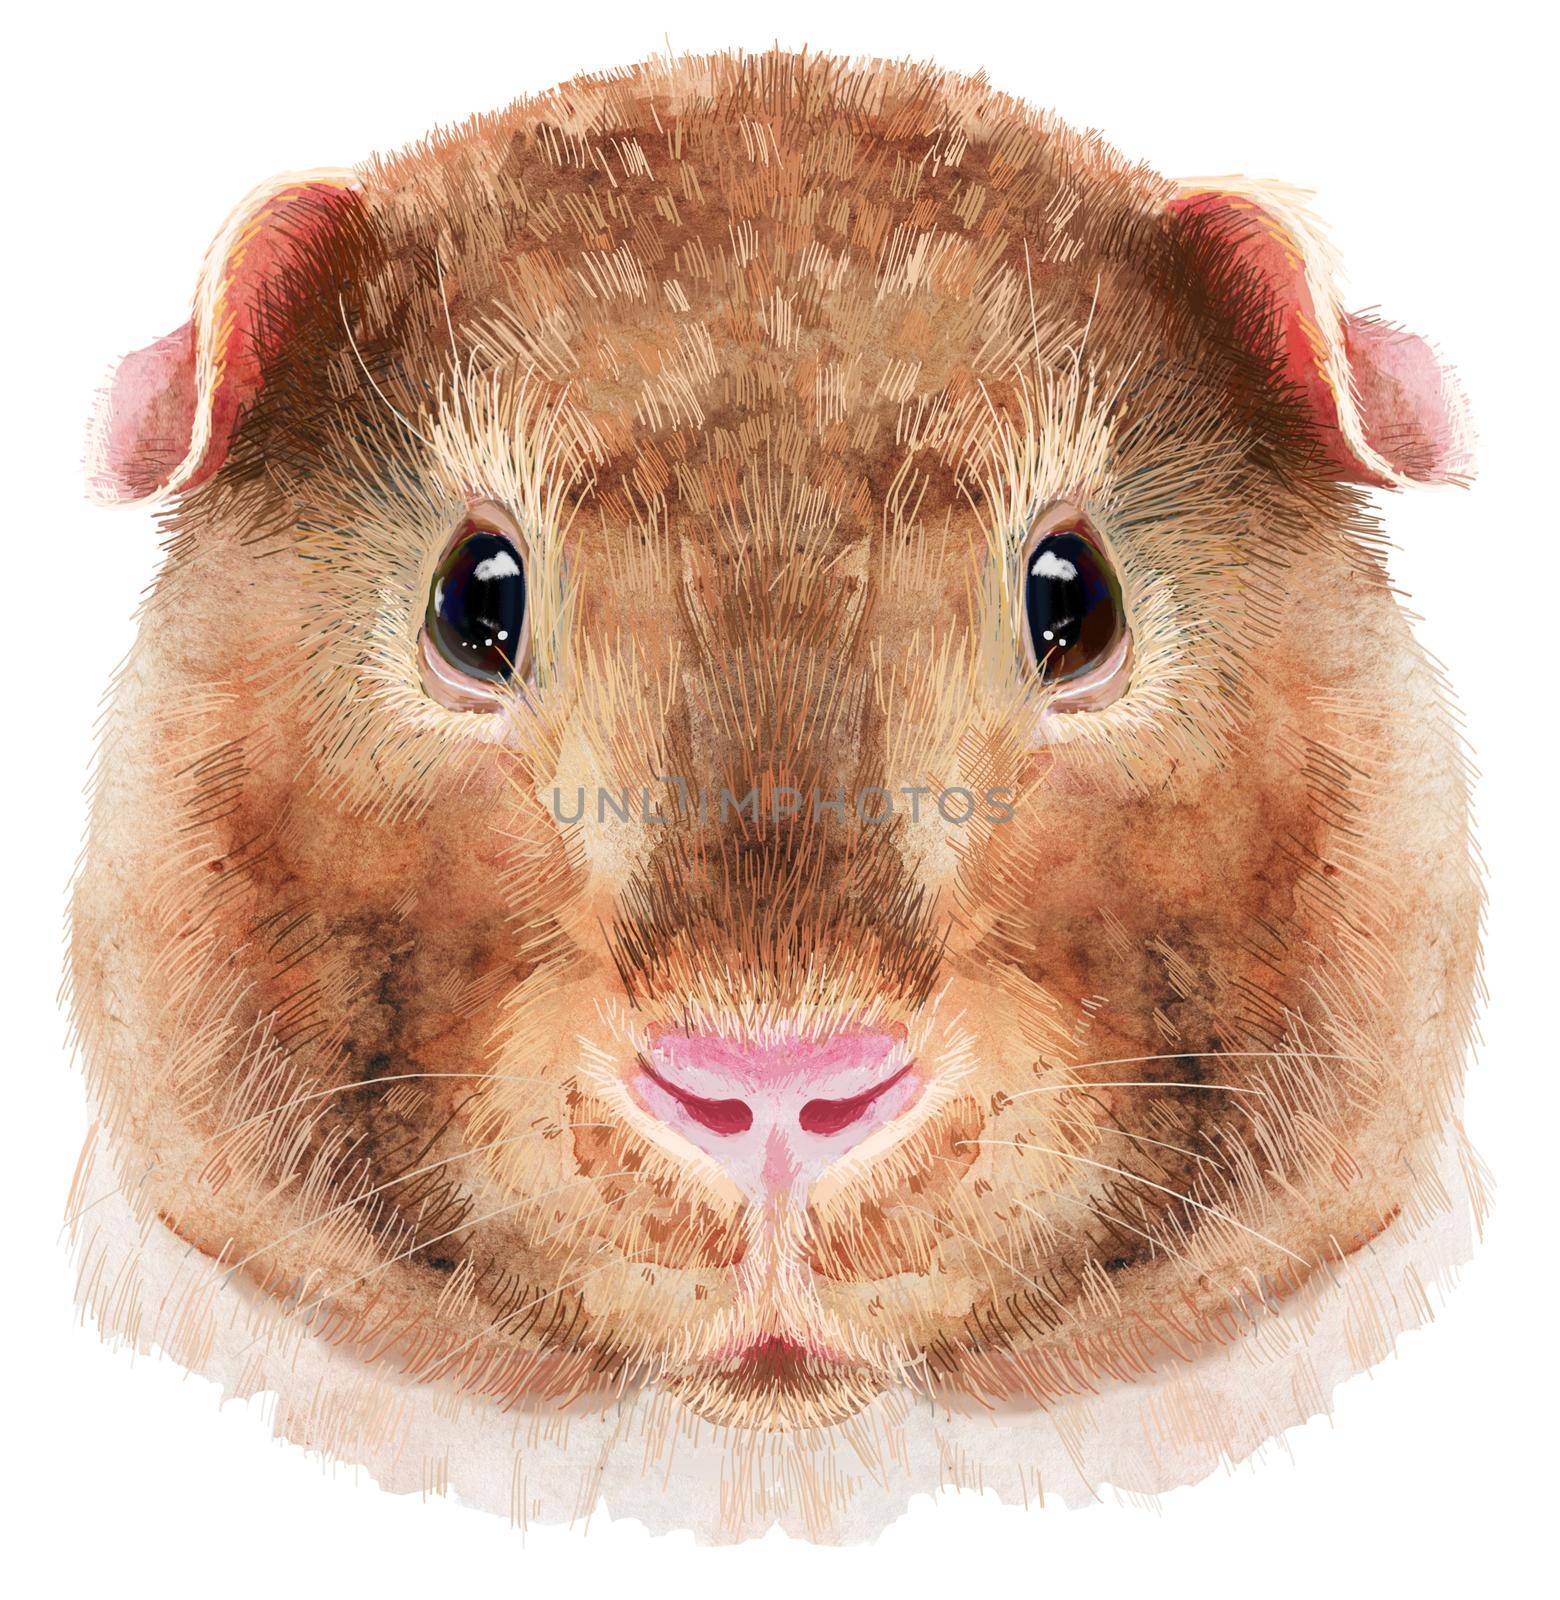 Guinea pig. Pig for T-shirt graphics. Watercolor Teddy guinea pig illustration